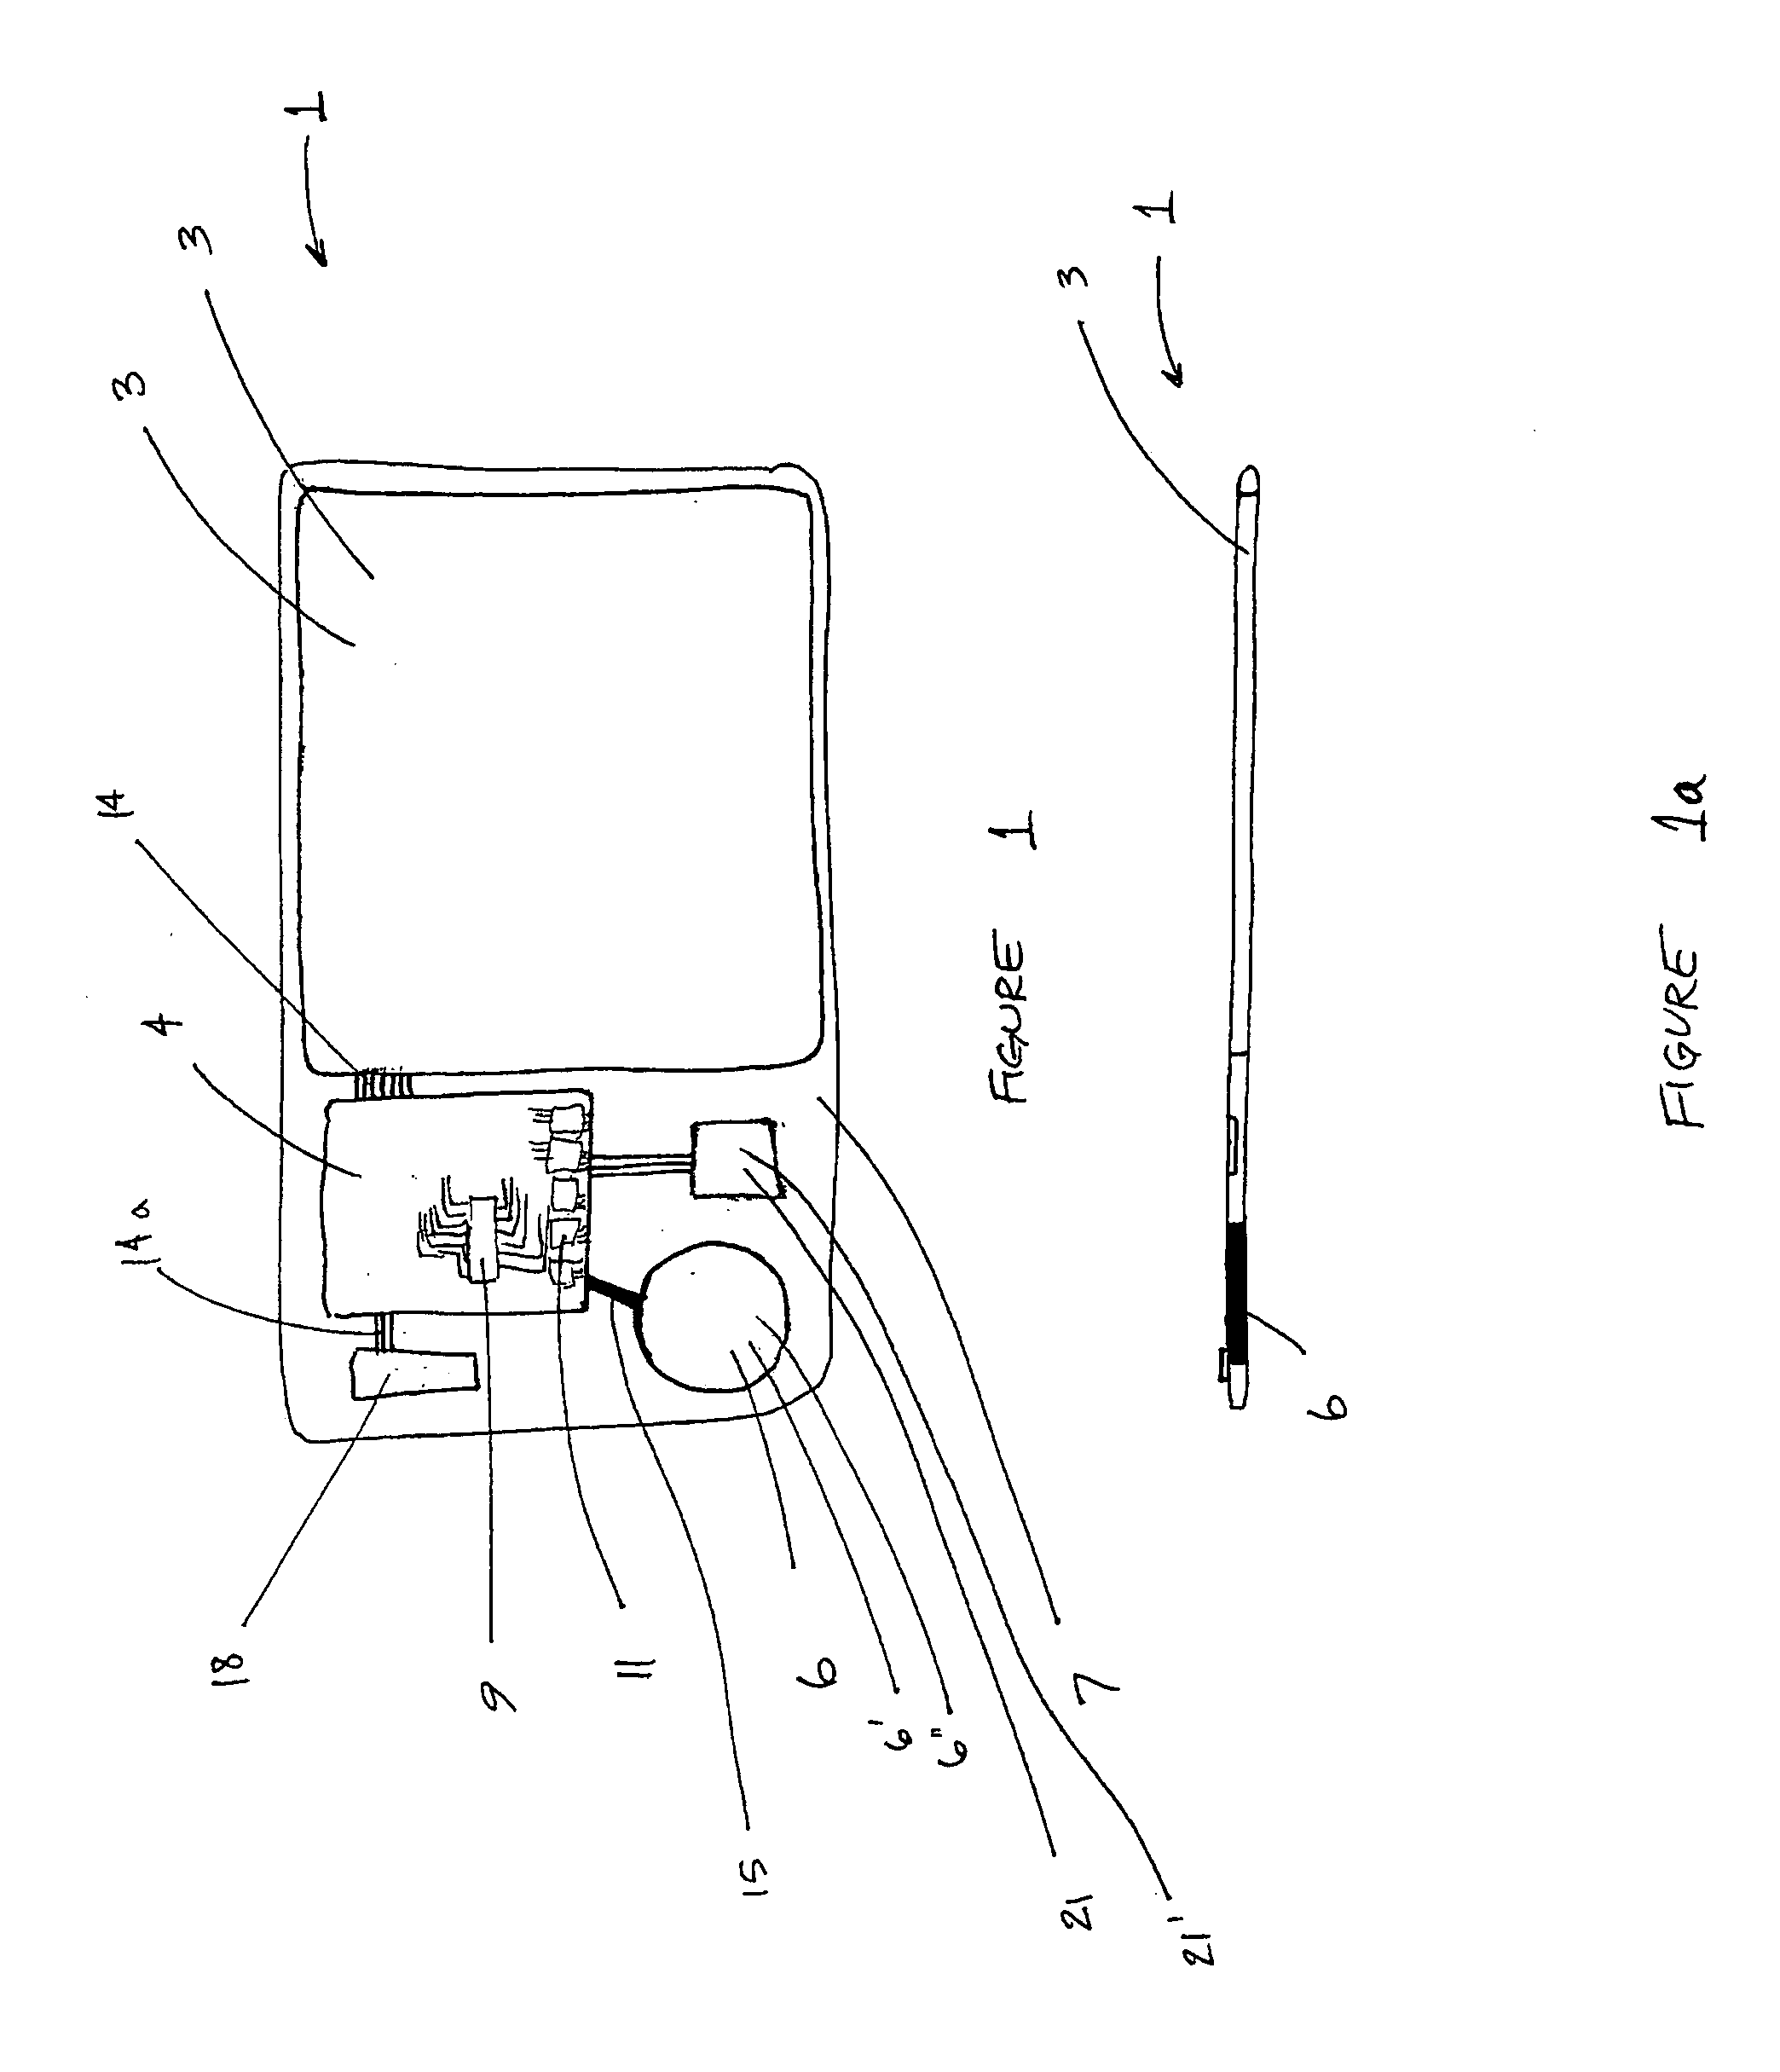 Self contained device for displaying electronic information